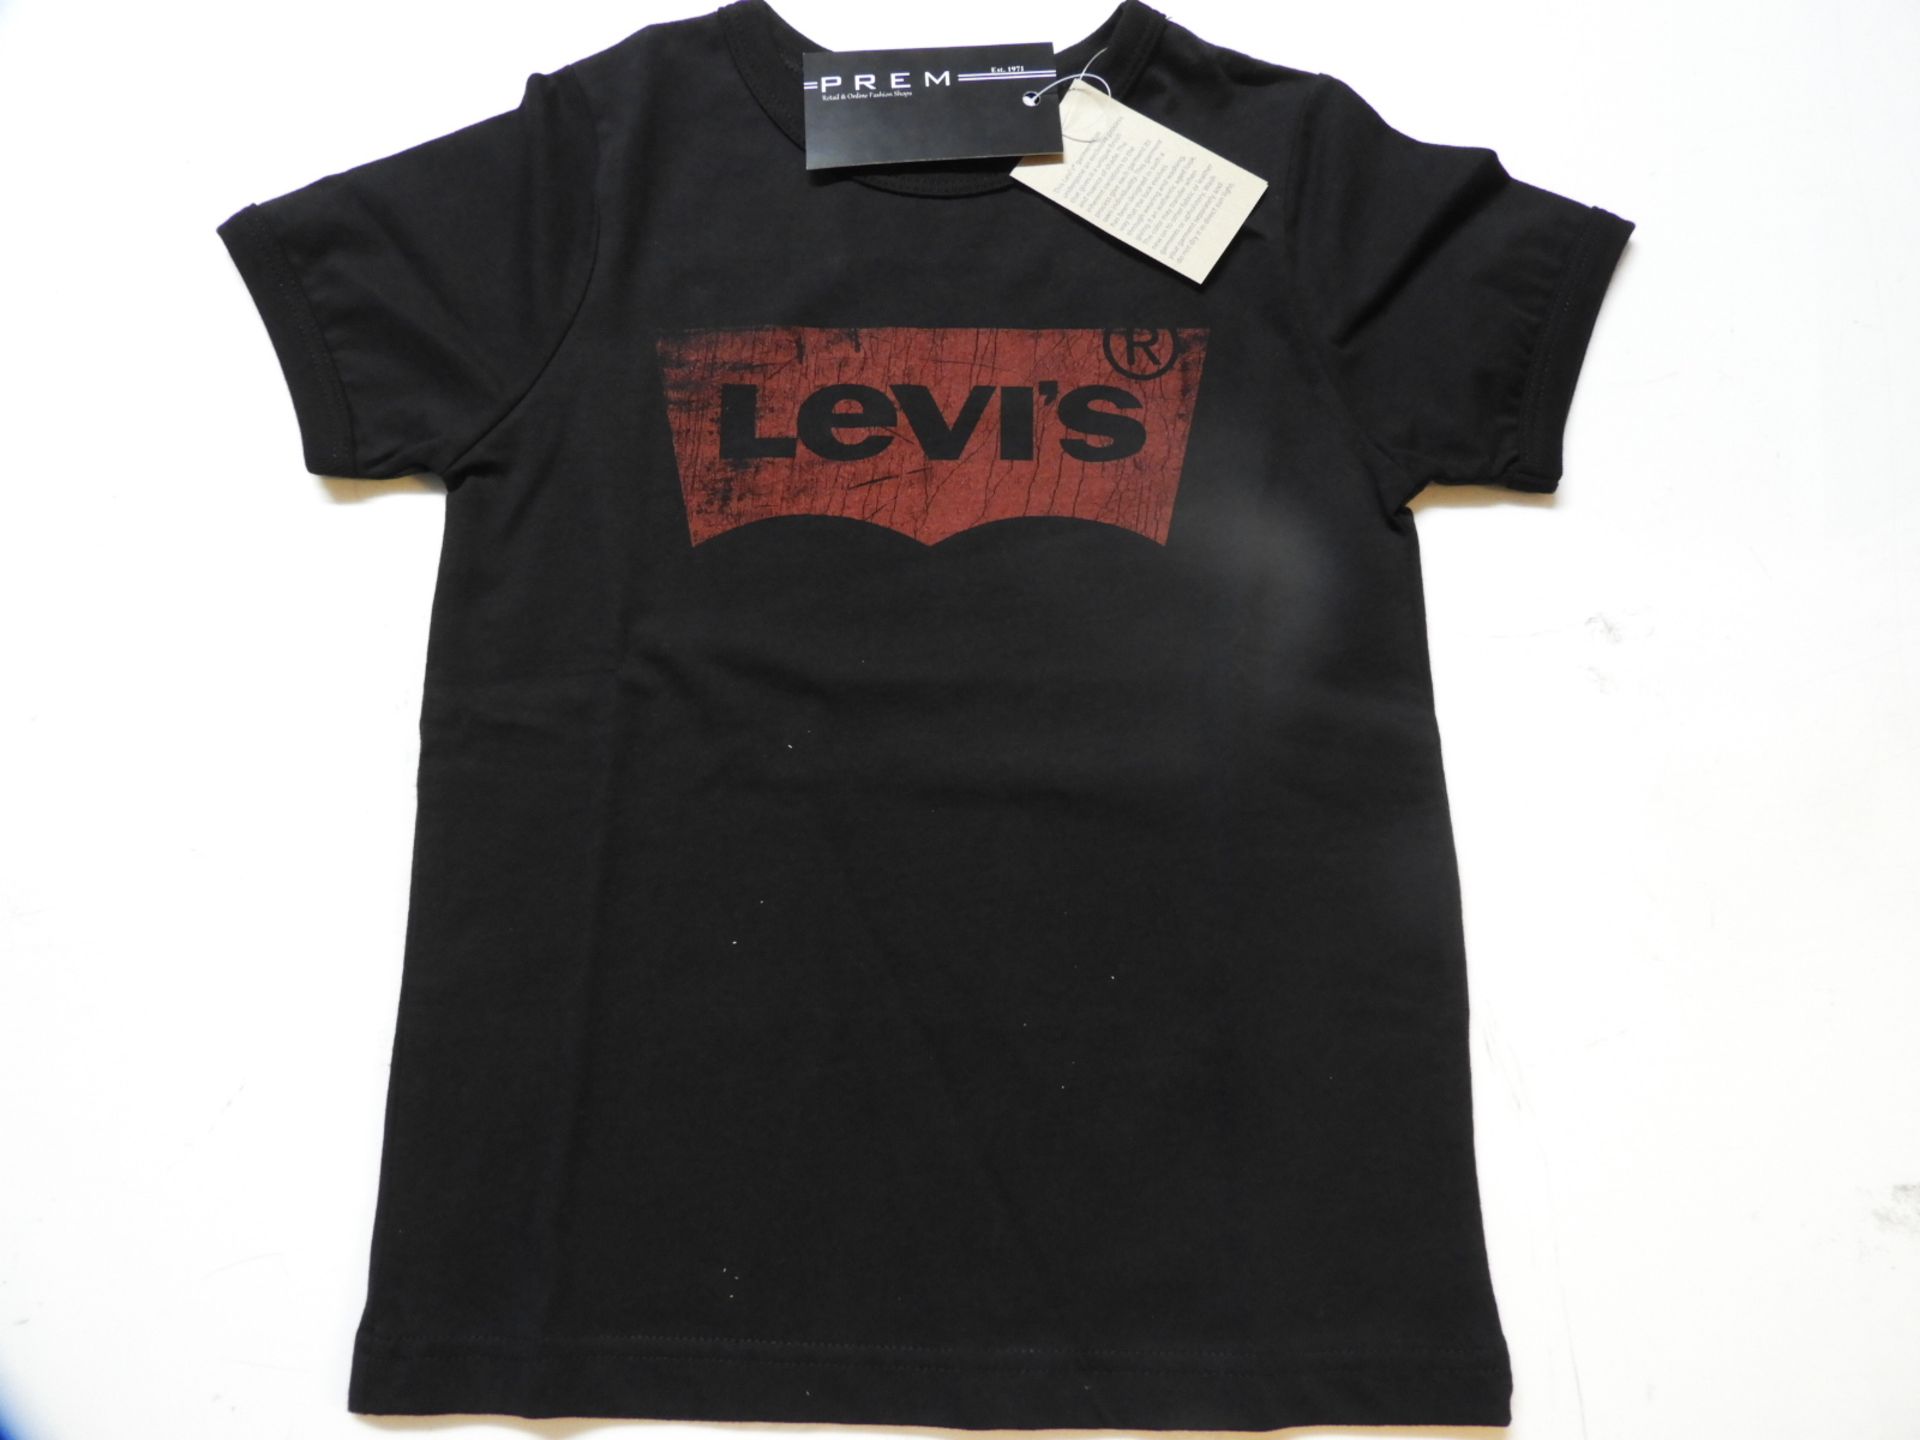 Levi's Childs T-Shirt Size: 8 Years